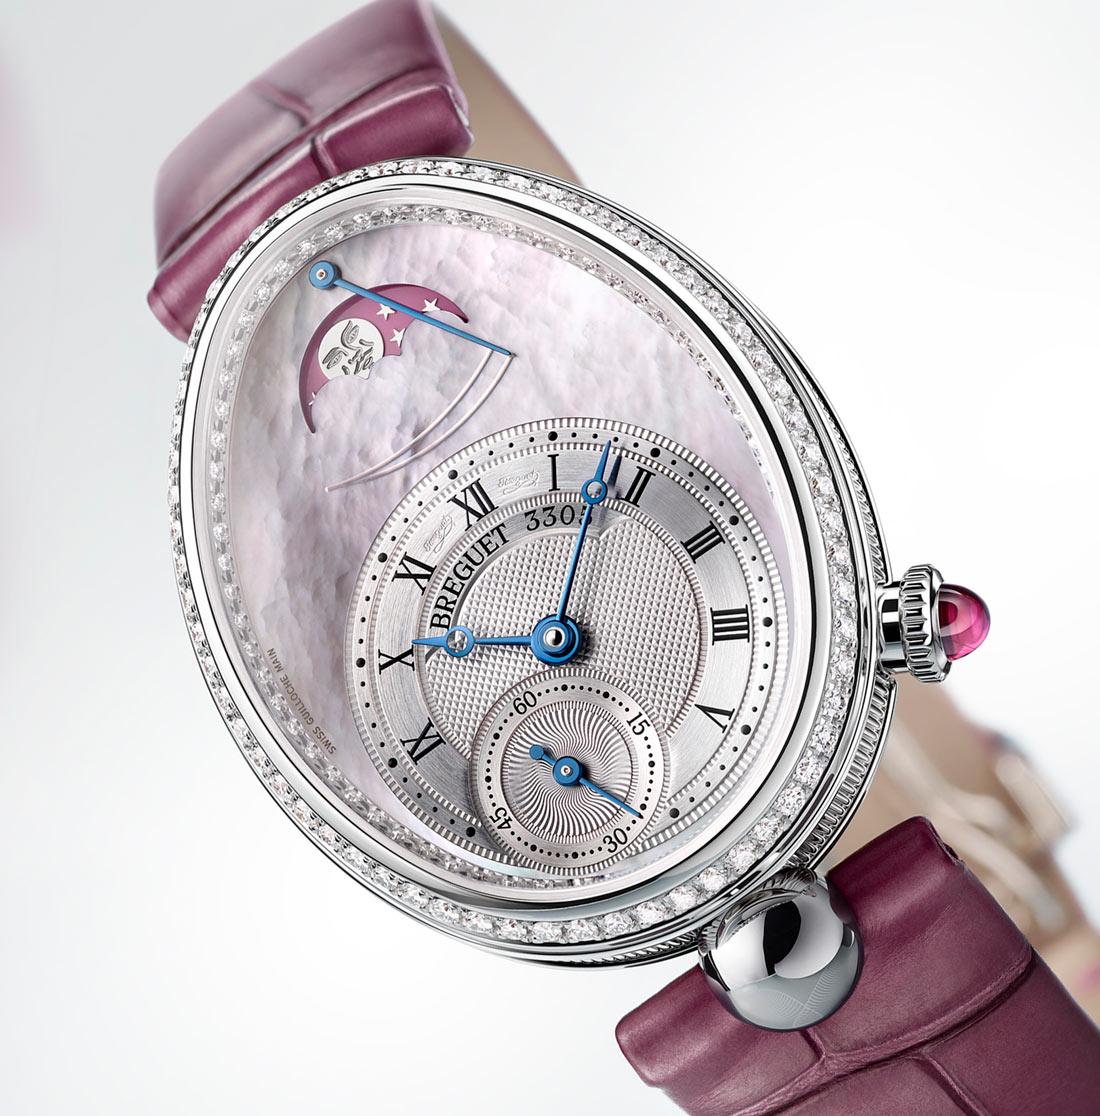 6 Luxury Watches For Women With Infinite Elegance - The Watch Company